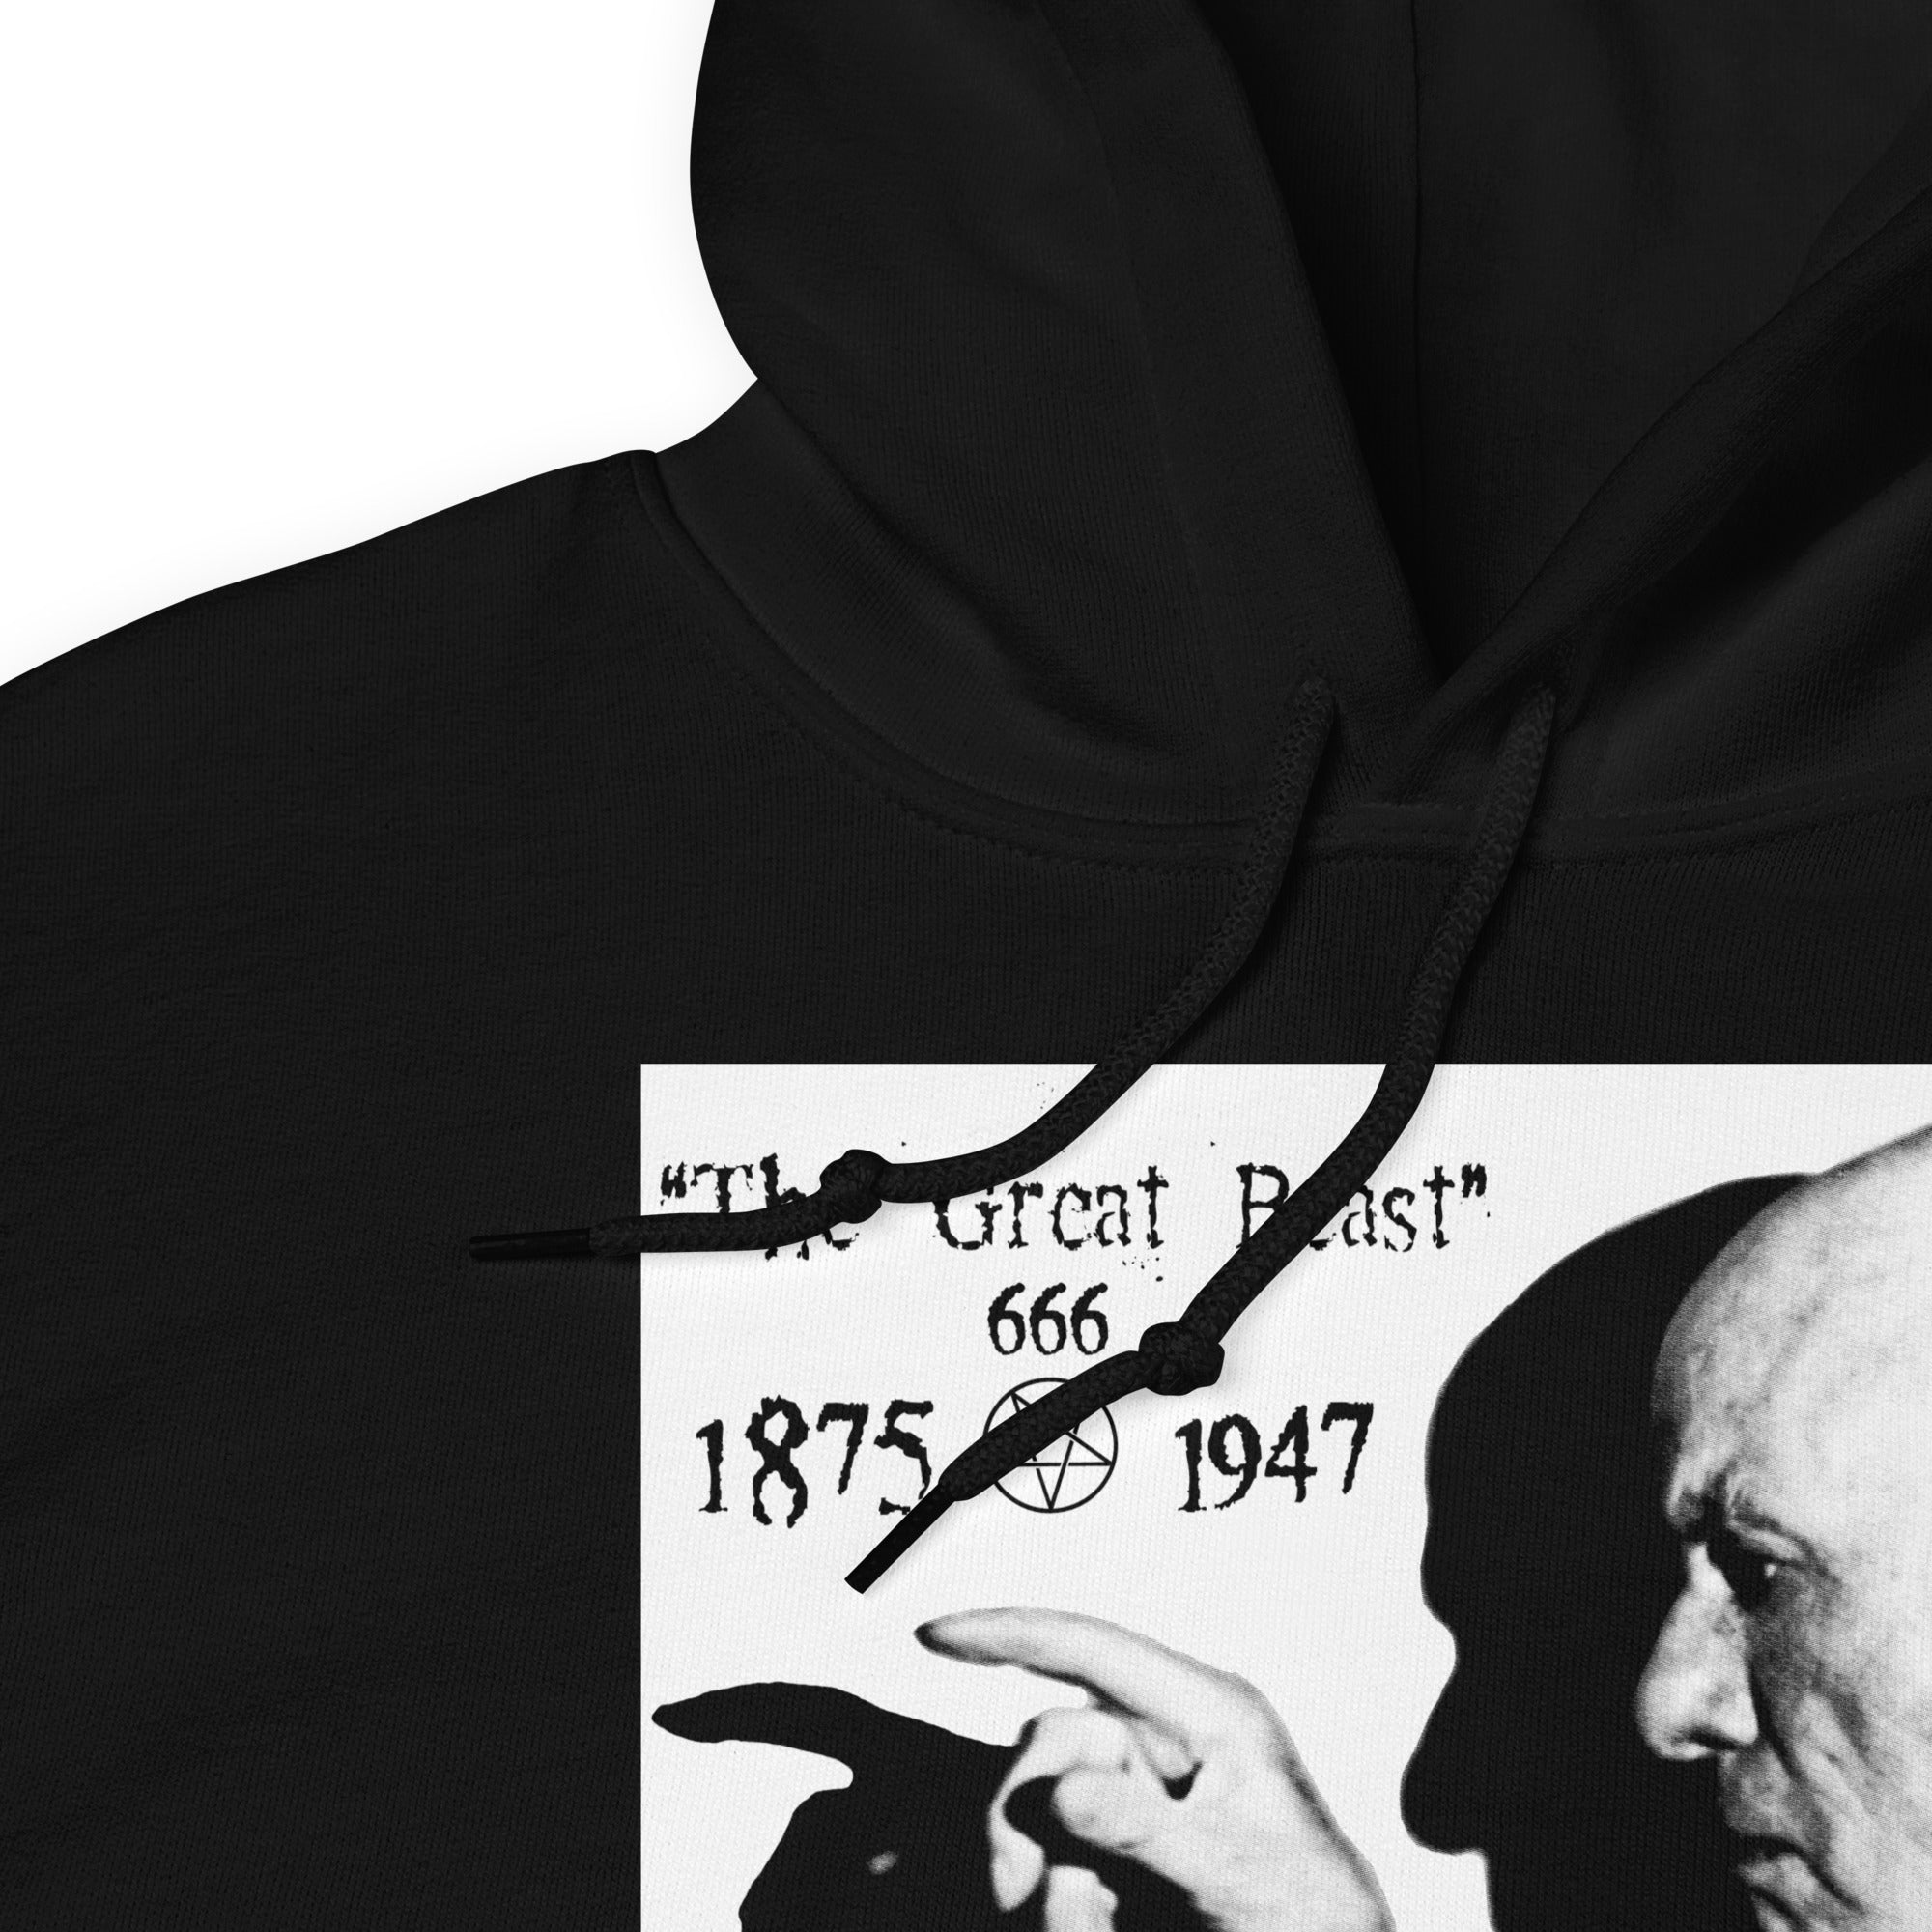 Aleister Crowley Infamous Occult Leader of Thelema Sex Magic Black Hoodie - Edge of Life Designs